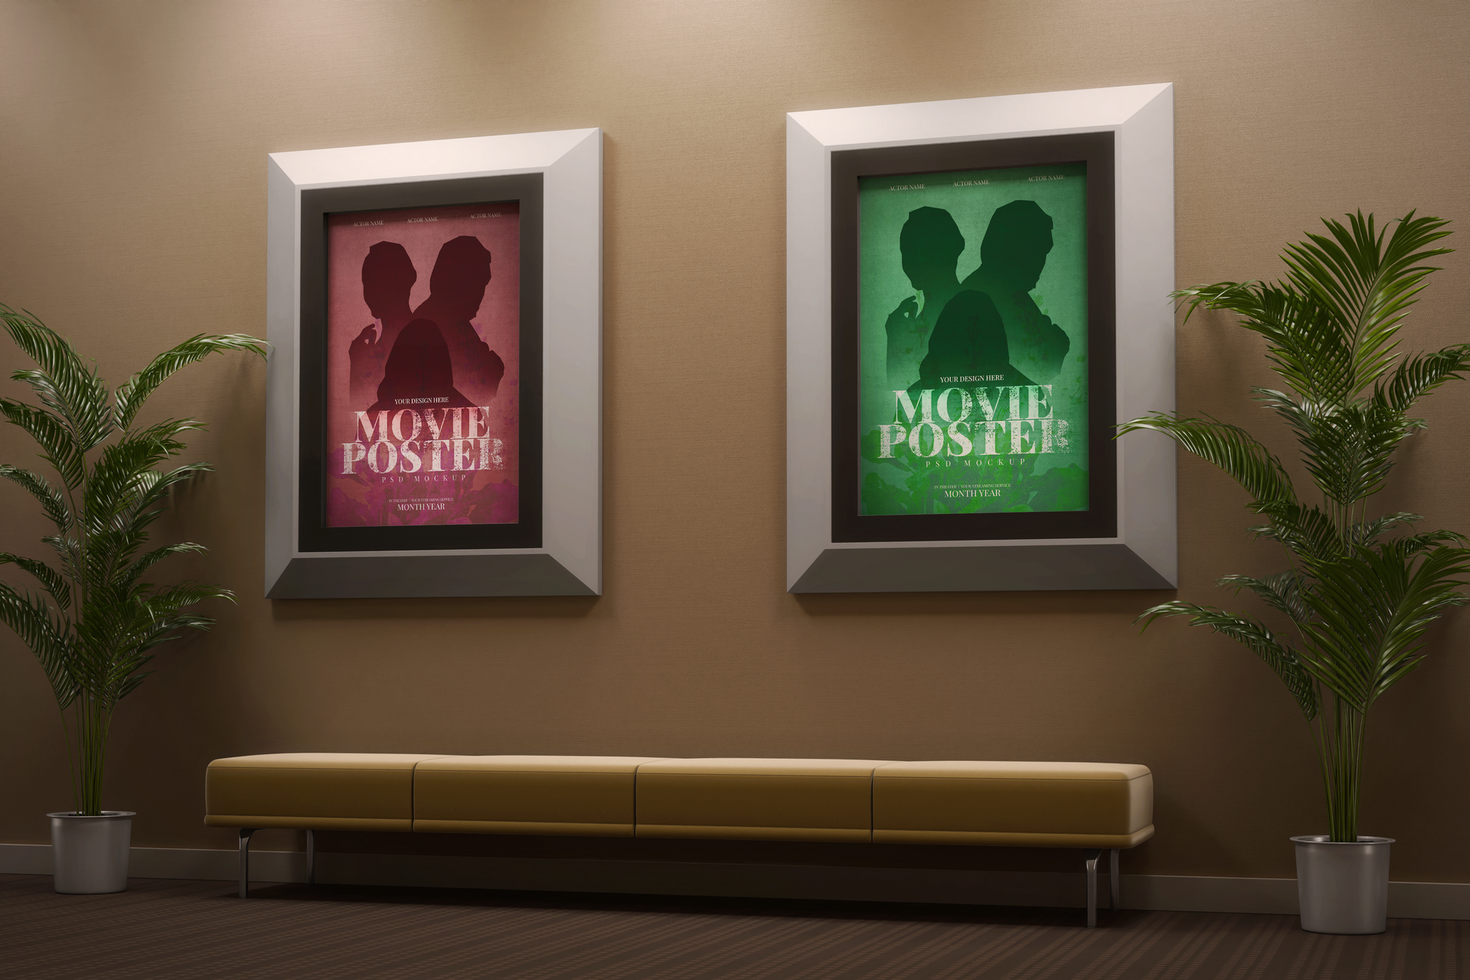 cinema film movie poster 27 x 40 inch size with frame hanging in wall realistic editable mockup template psd